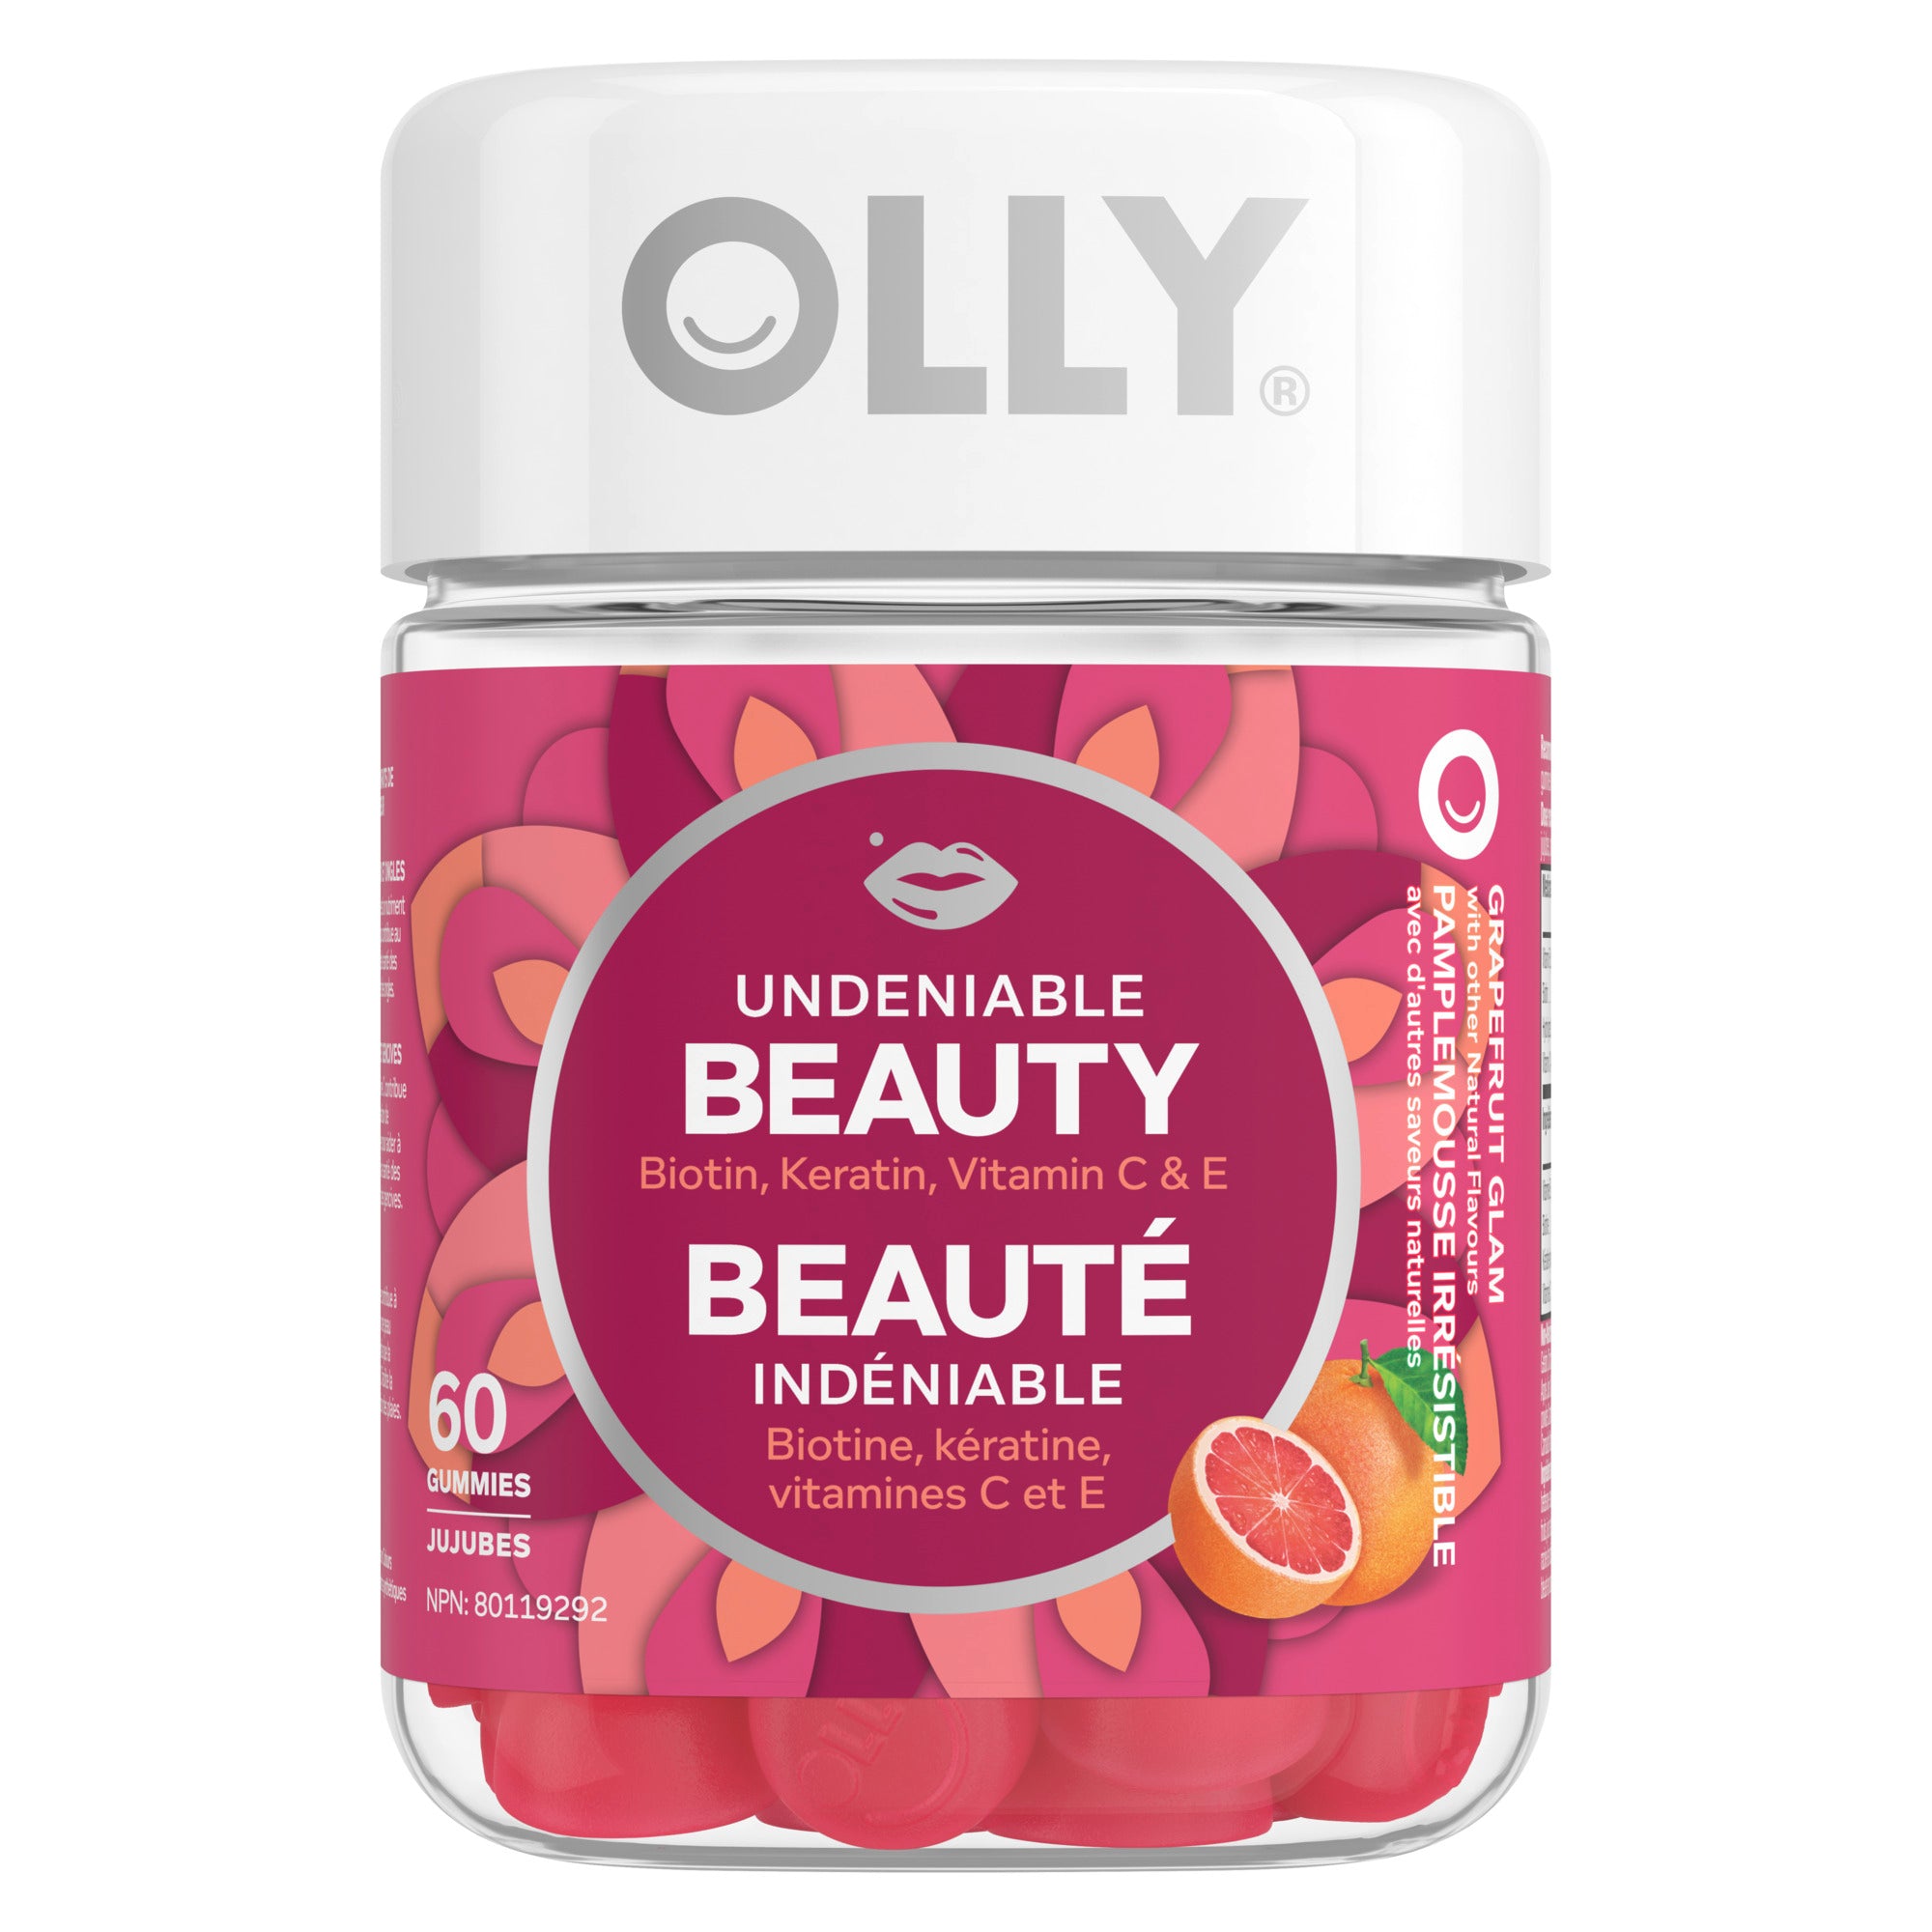 An image showing the front side of the pink OLLY Undeniable Beauty 60 Gummies container. 